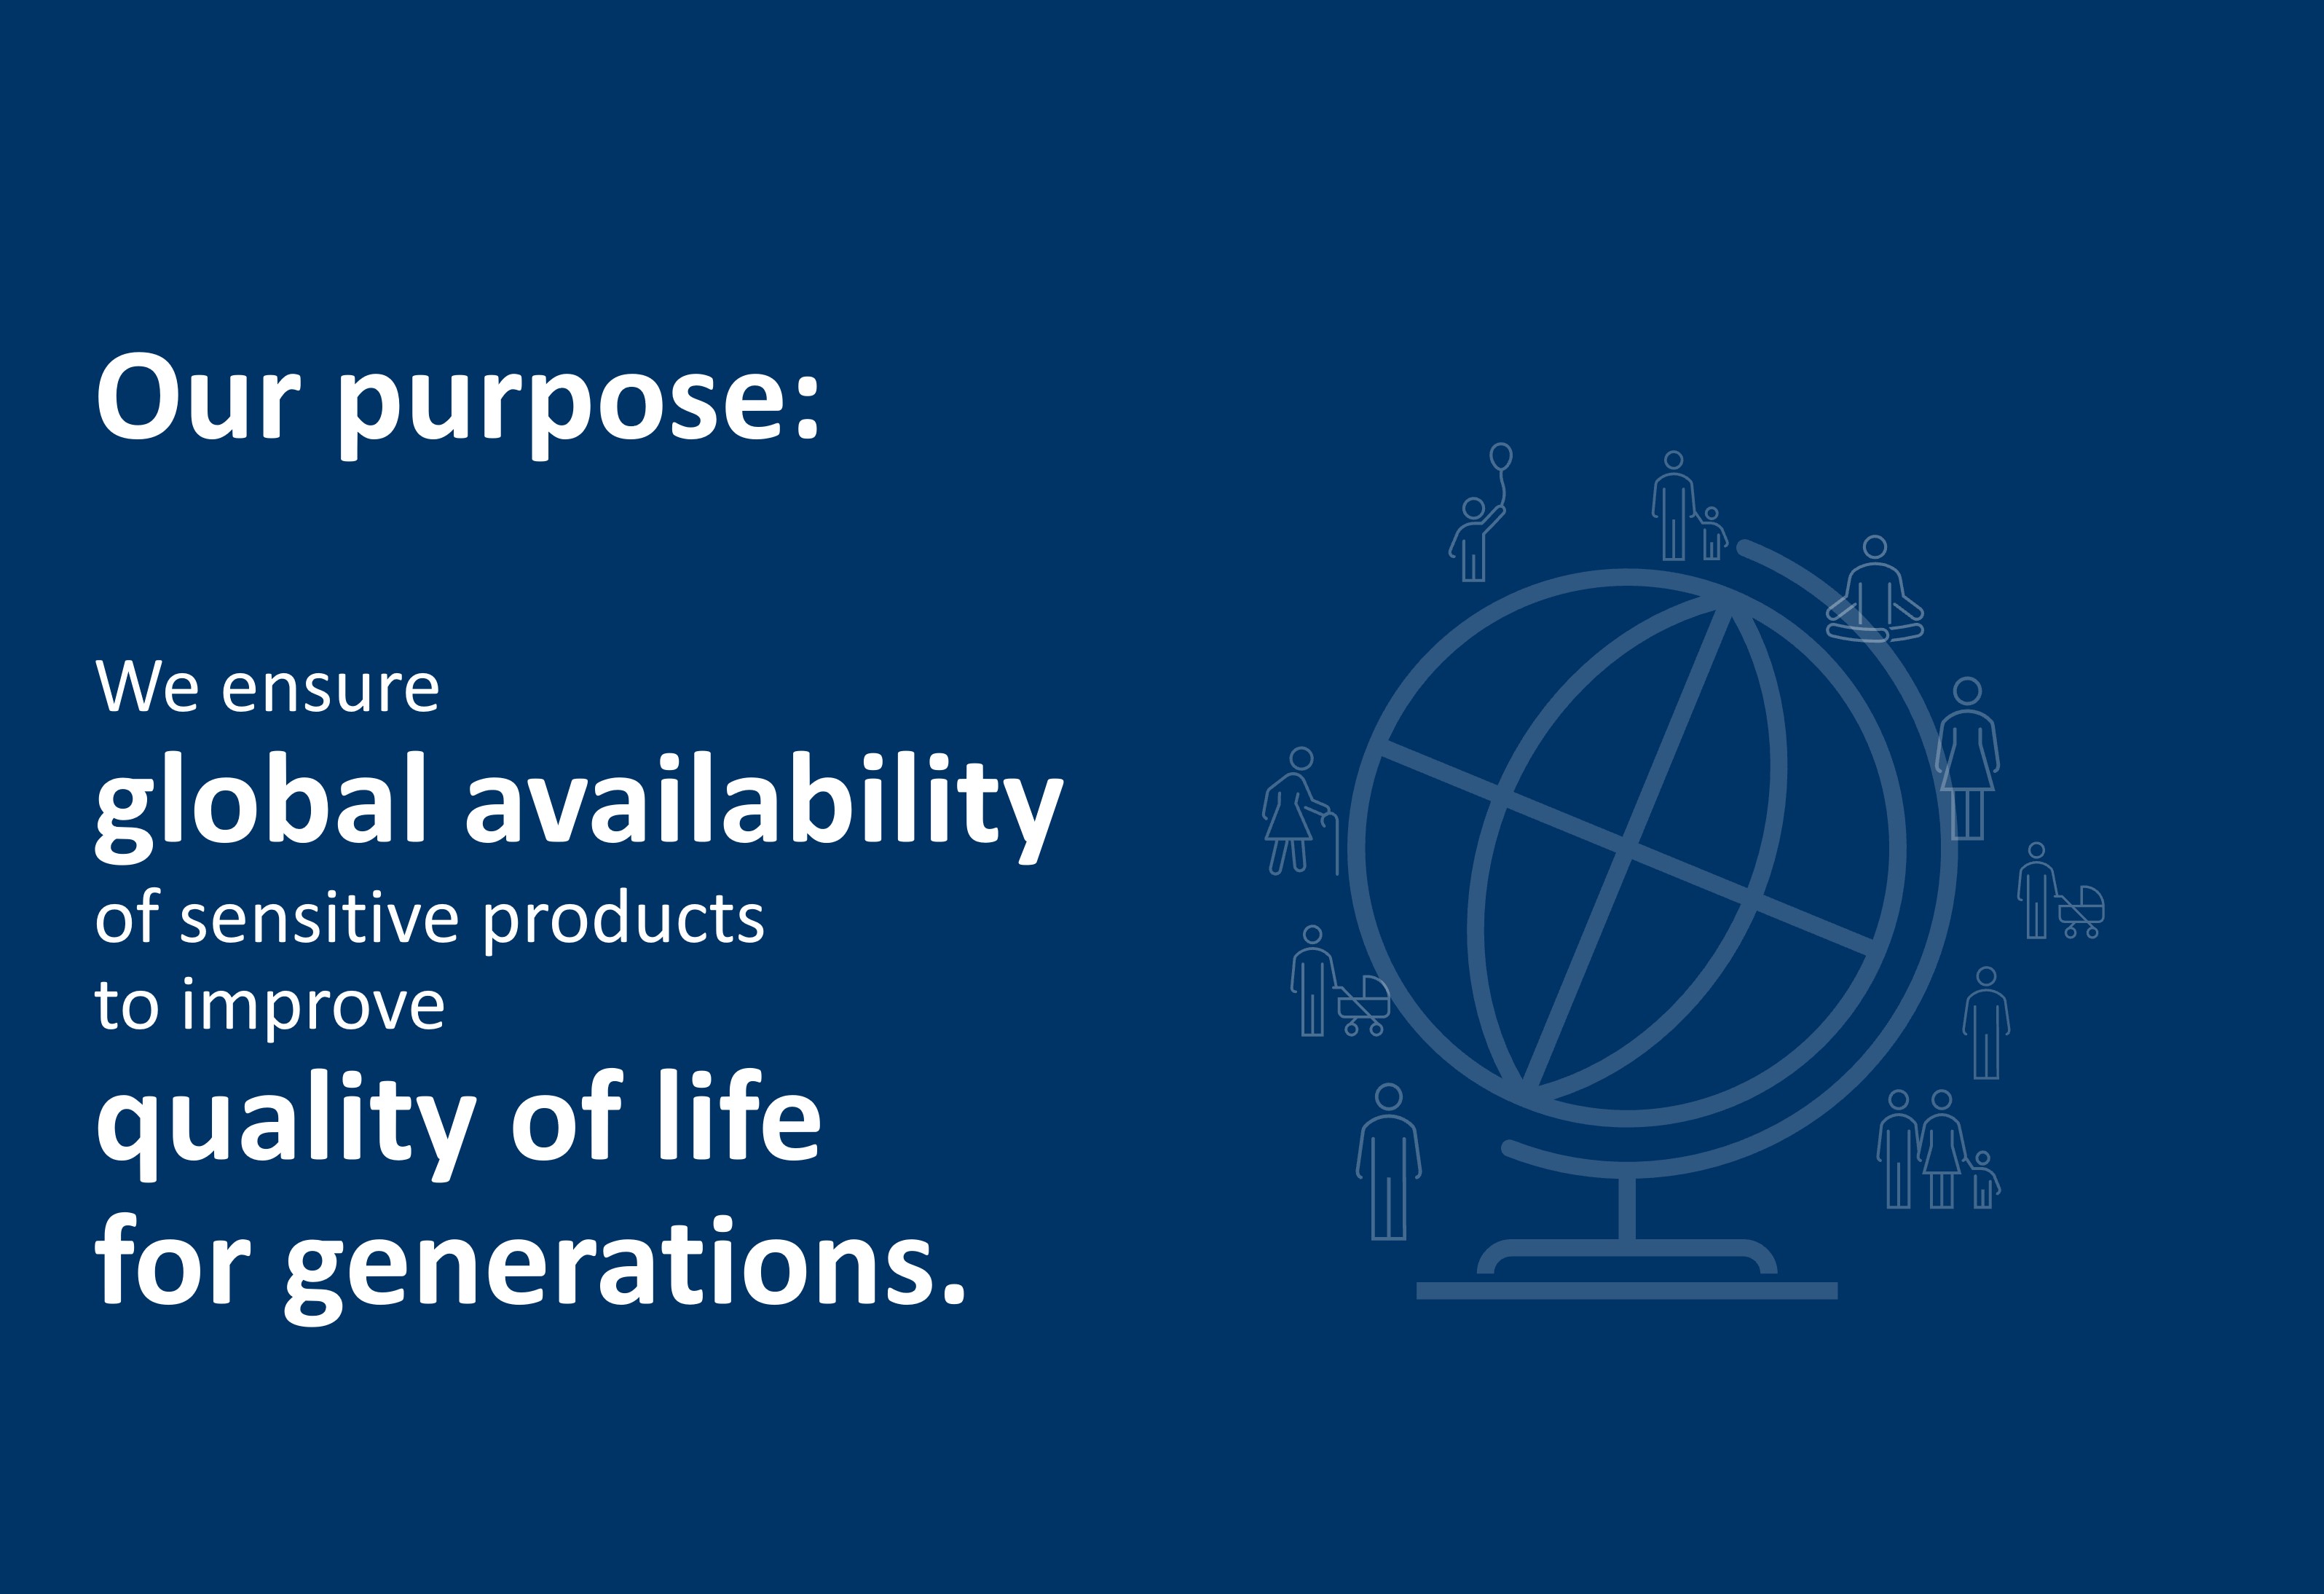 We ensure global availability of sensitive products to improve quality of life for generations